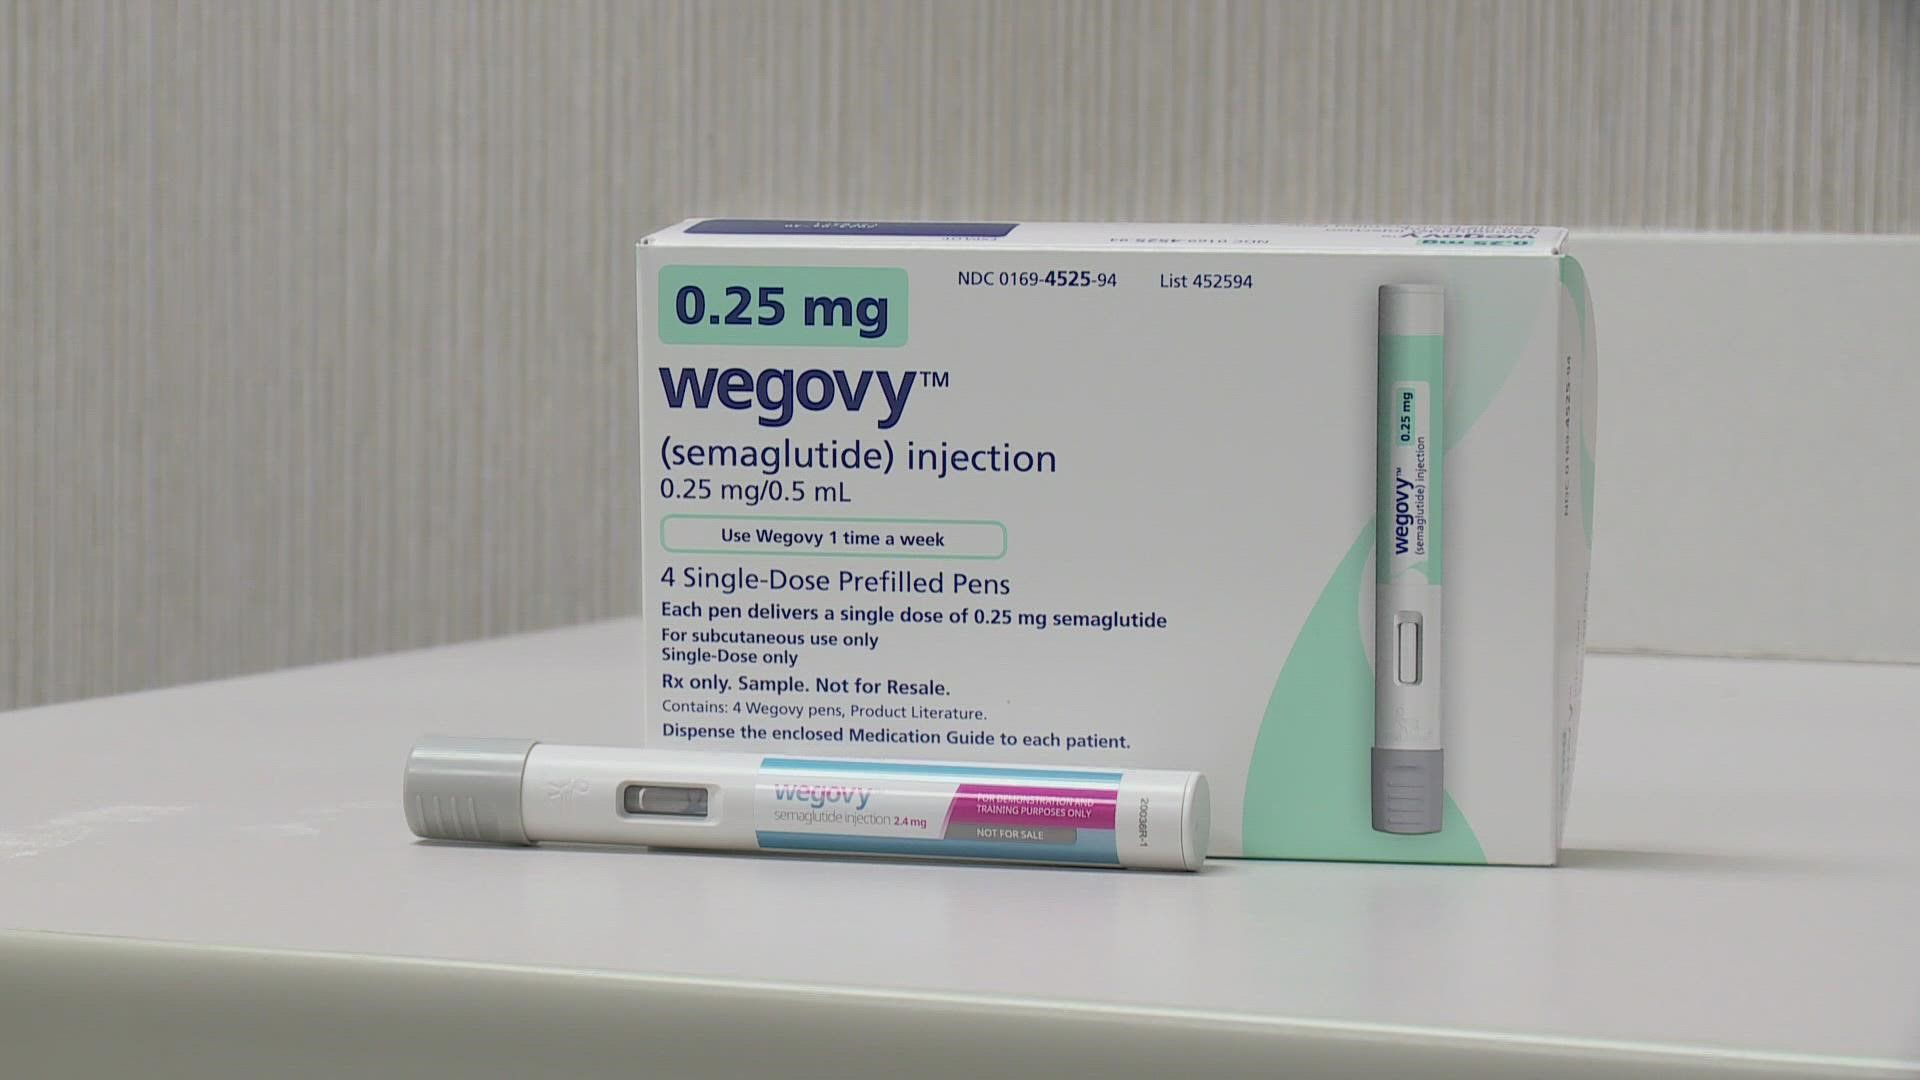 A new medicine on the market can help you lose weight with just one injection a week.